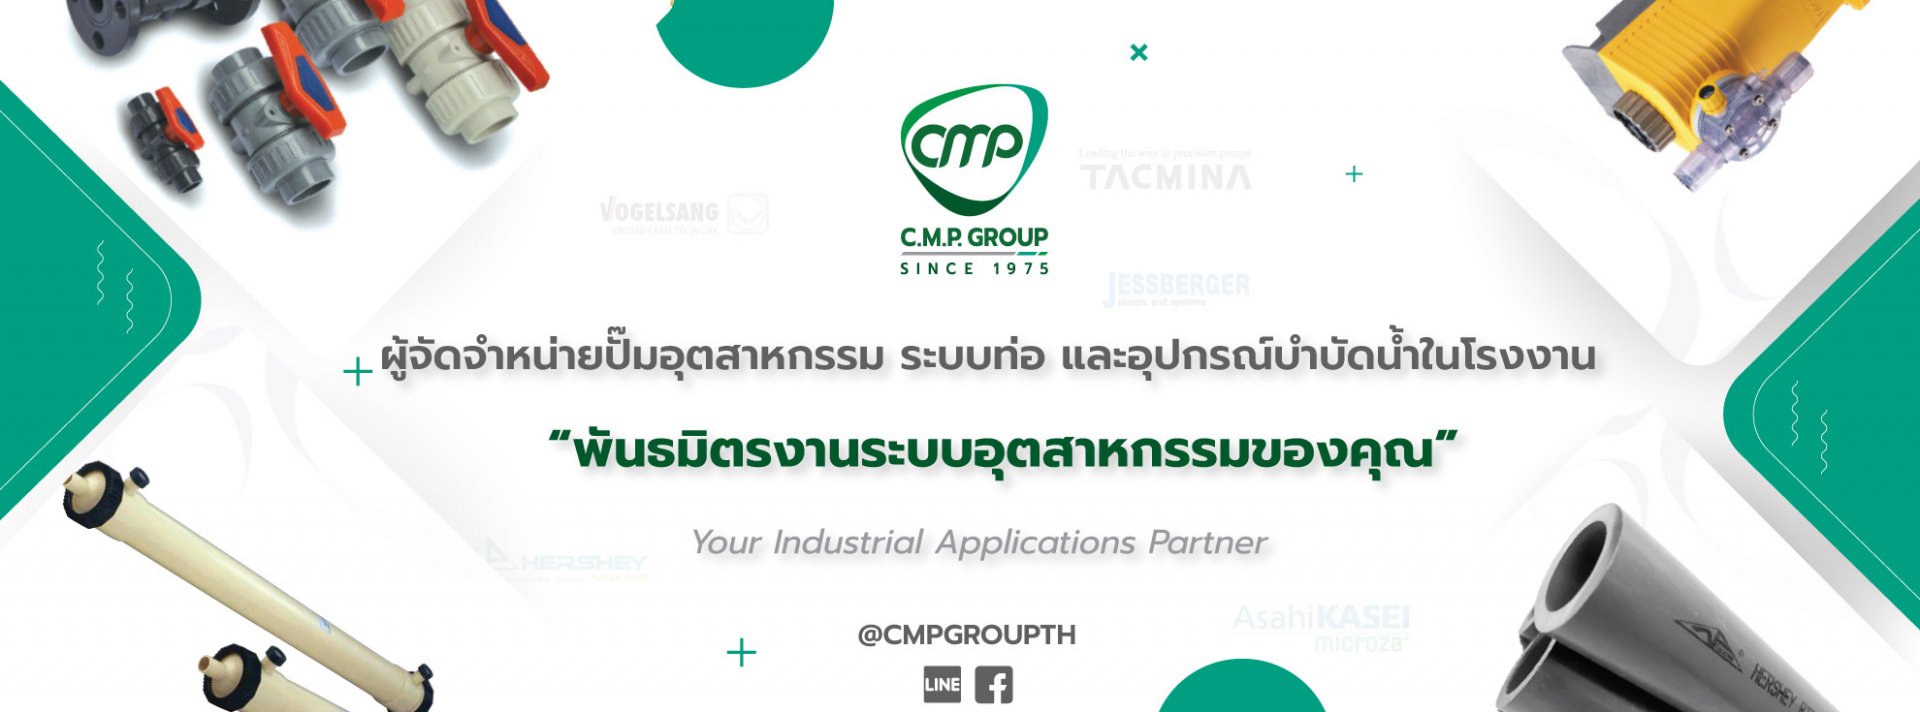 Intro Banner CMPGROUP